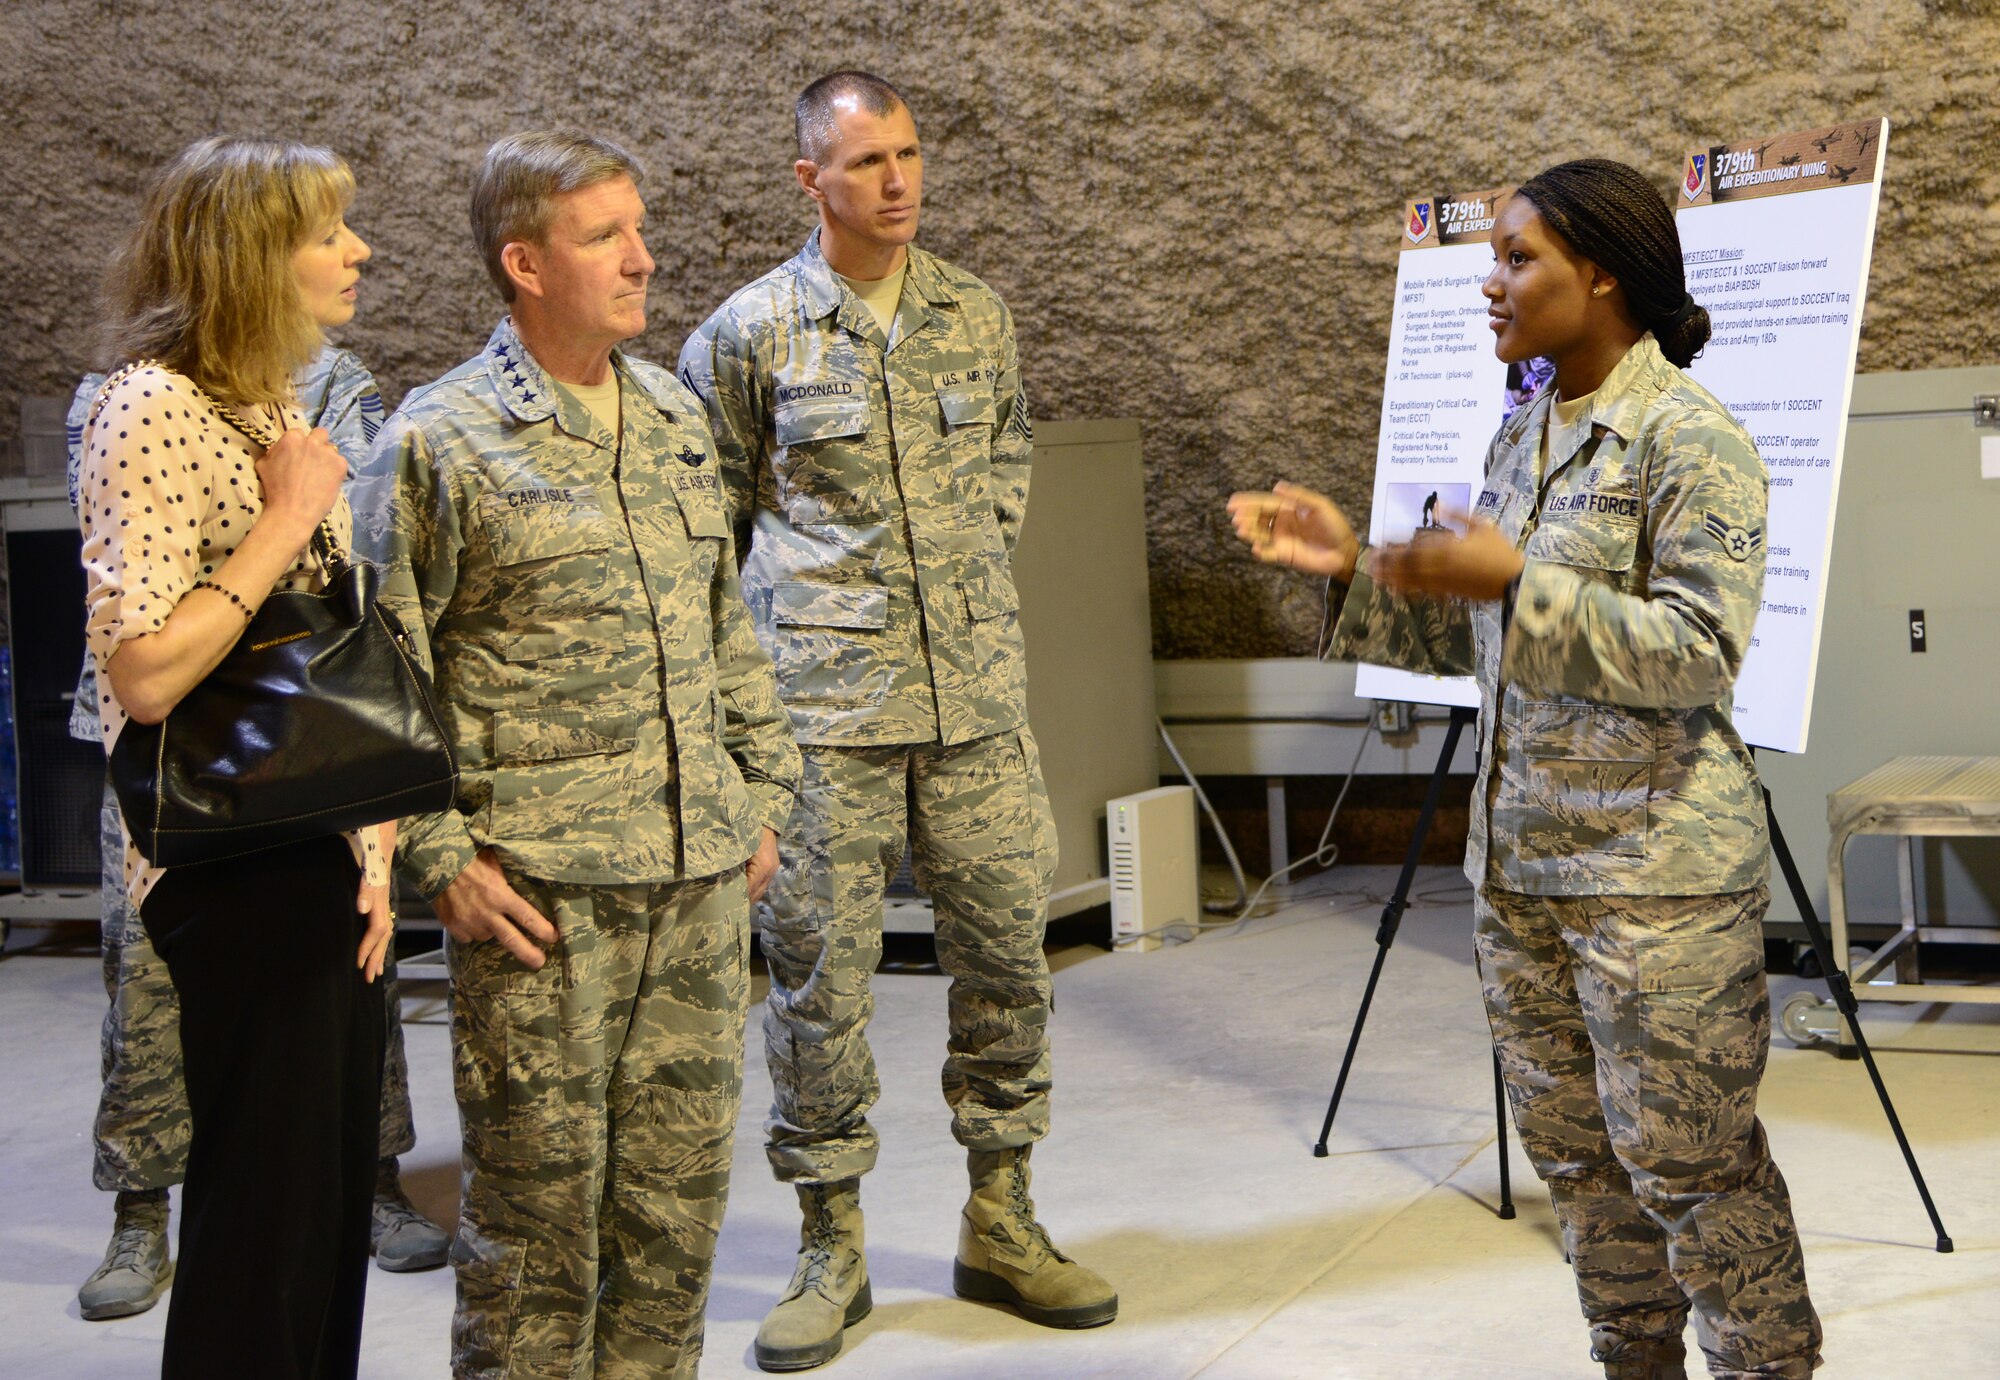 U.S. Air Force Airman 1st Class Jolonda Houston, right, 379th Expeditionary Medical Support Squadron, briefs Gen.  Hawk Carlisle, commander of Air Combat Command, his wife Gillian and Chief Master Sgt. Steve McDonald, ACC command chief, on the blood transshipment program, Nov. 25, 2014, at Al Udeid Air Base, Qatar. During his visit, Carlisle toured many facilities and visited with Airmen of the 379th Air Expeditionary Wing, thanking them for their service. (U.S. Air Force photo by Senior Airman Kia Atkins)